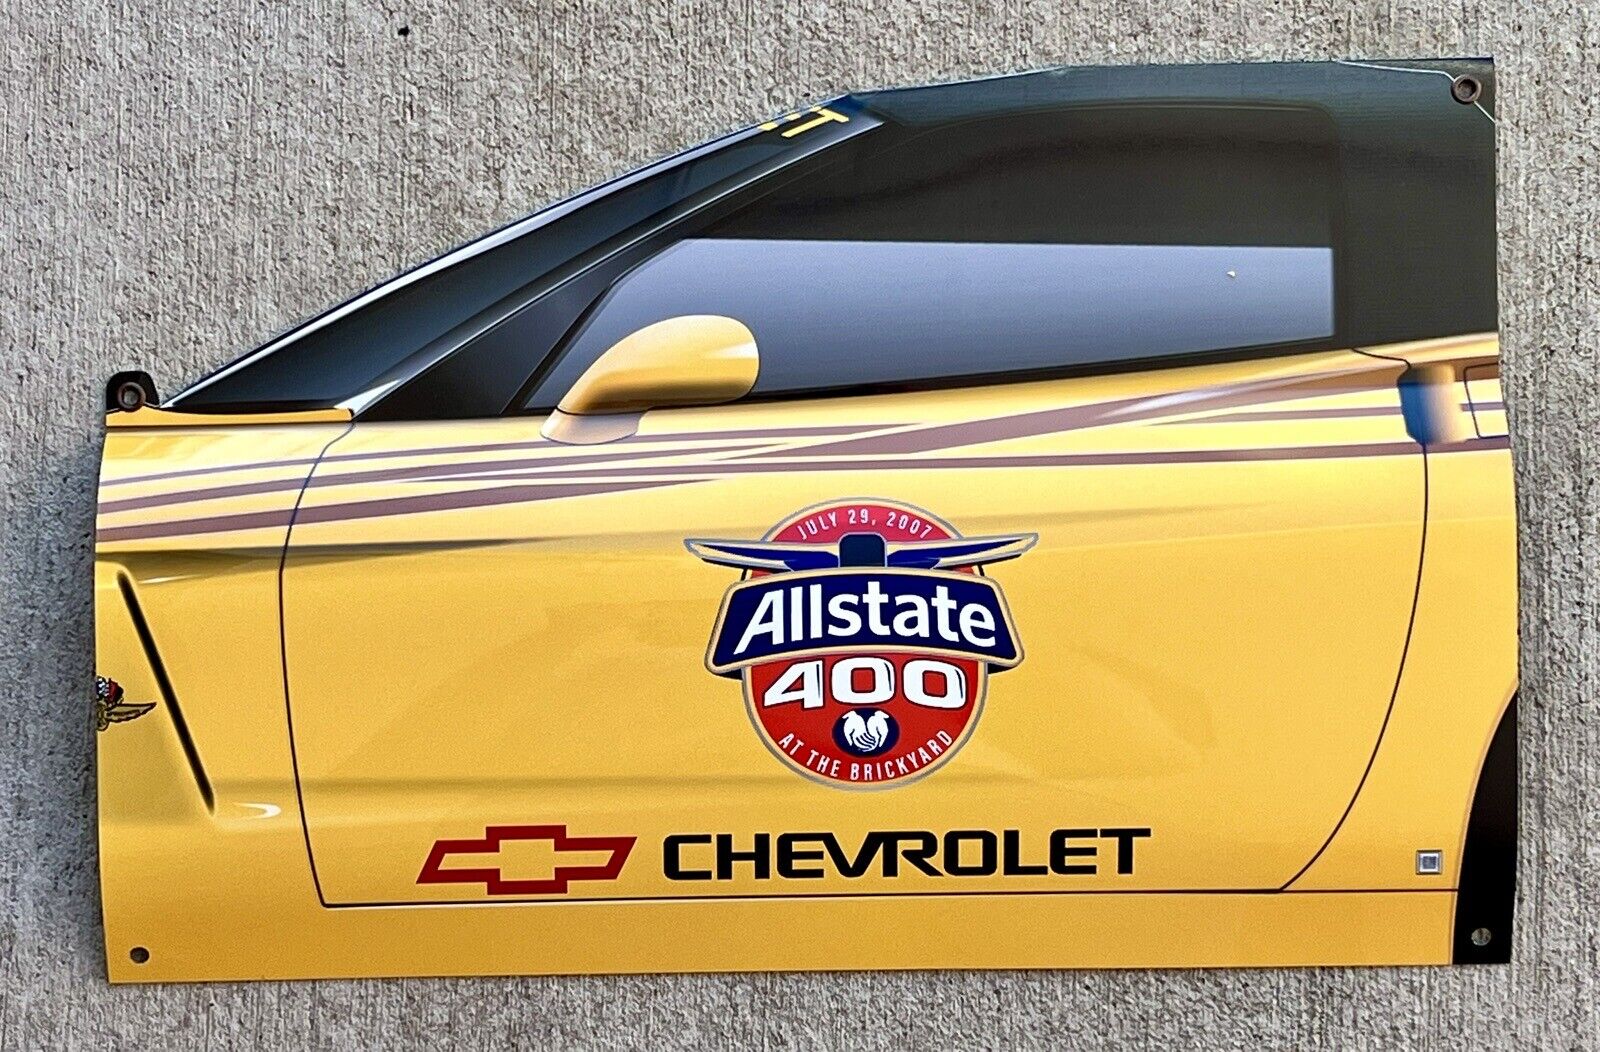 WOW Curved 2007 Chevrolet Corvette Indy 500 Brickyard 400 Car Door Style Sign